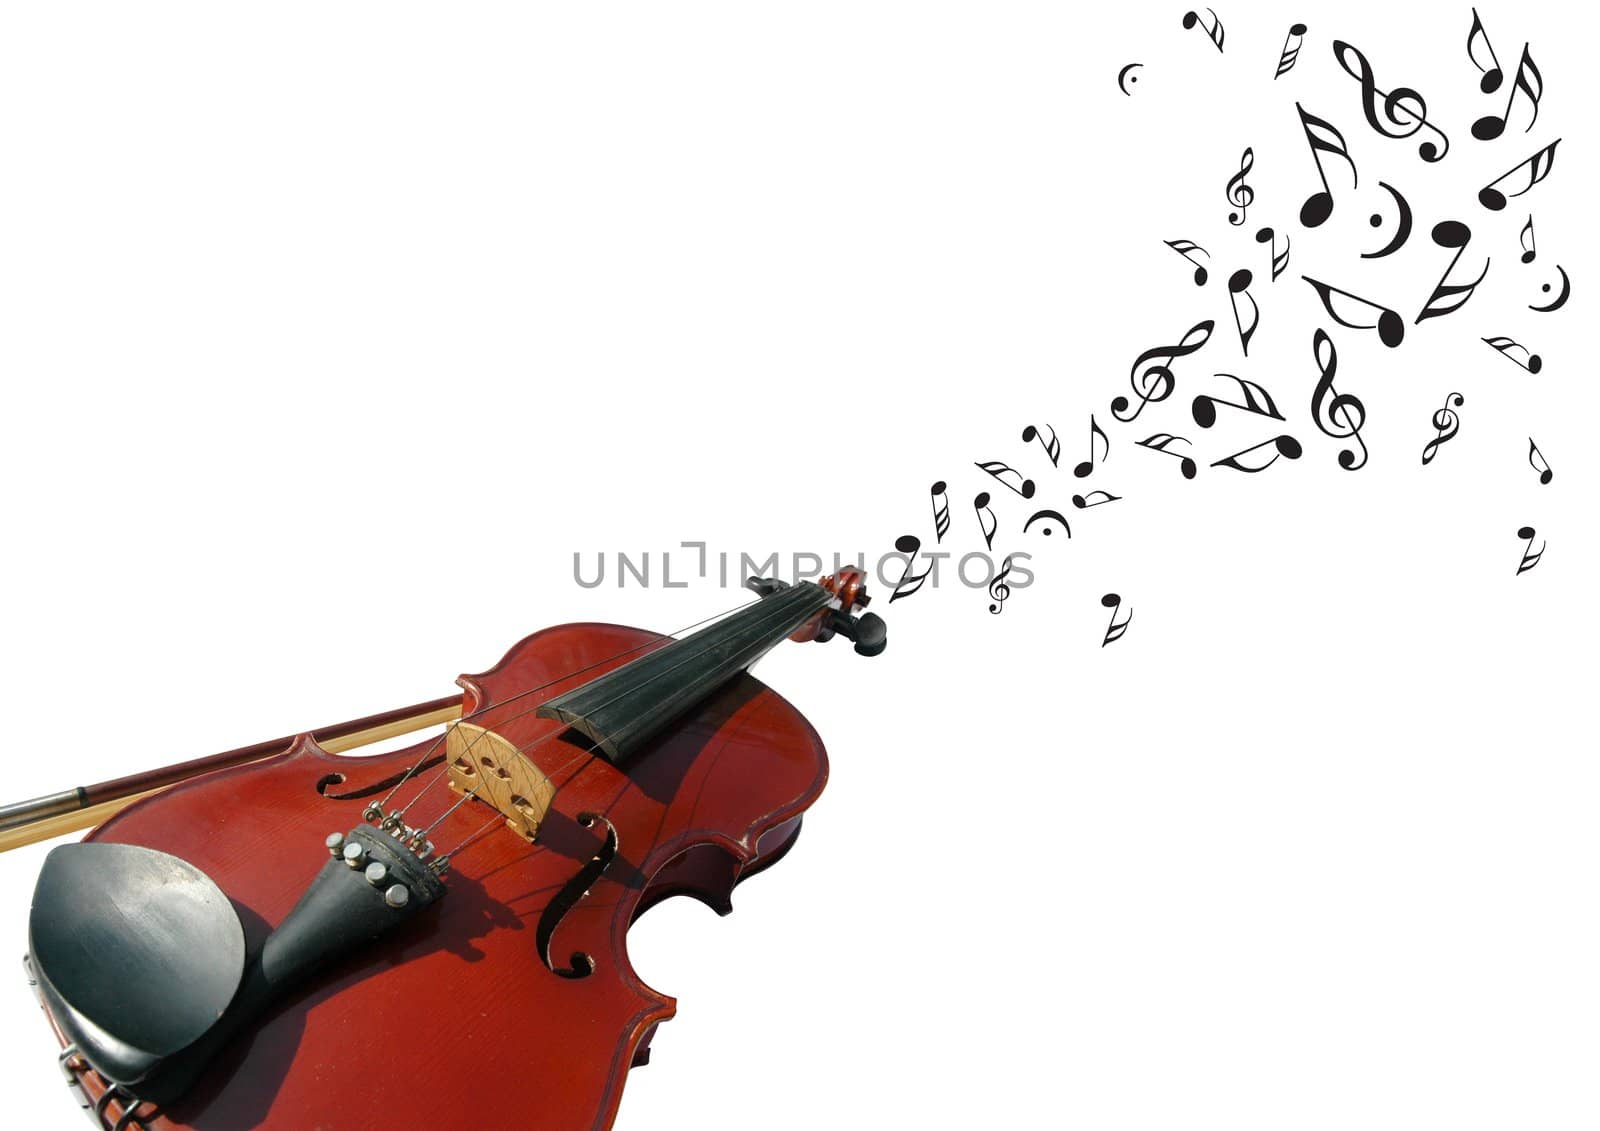 Violin with music notes by khwi